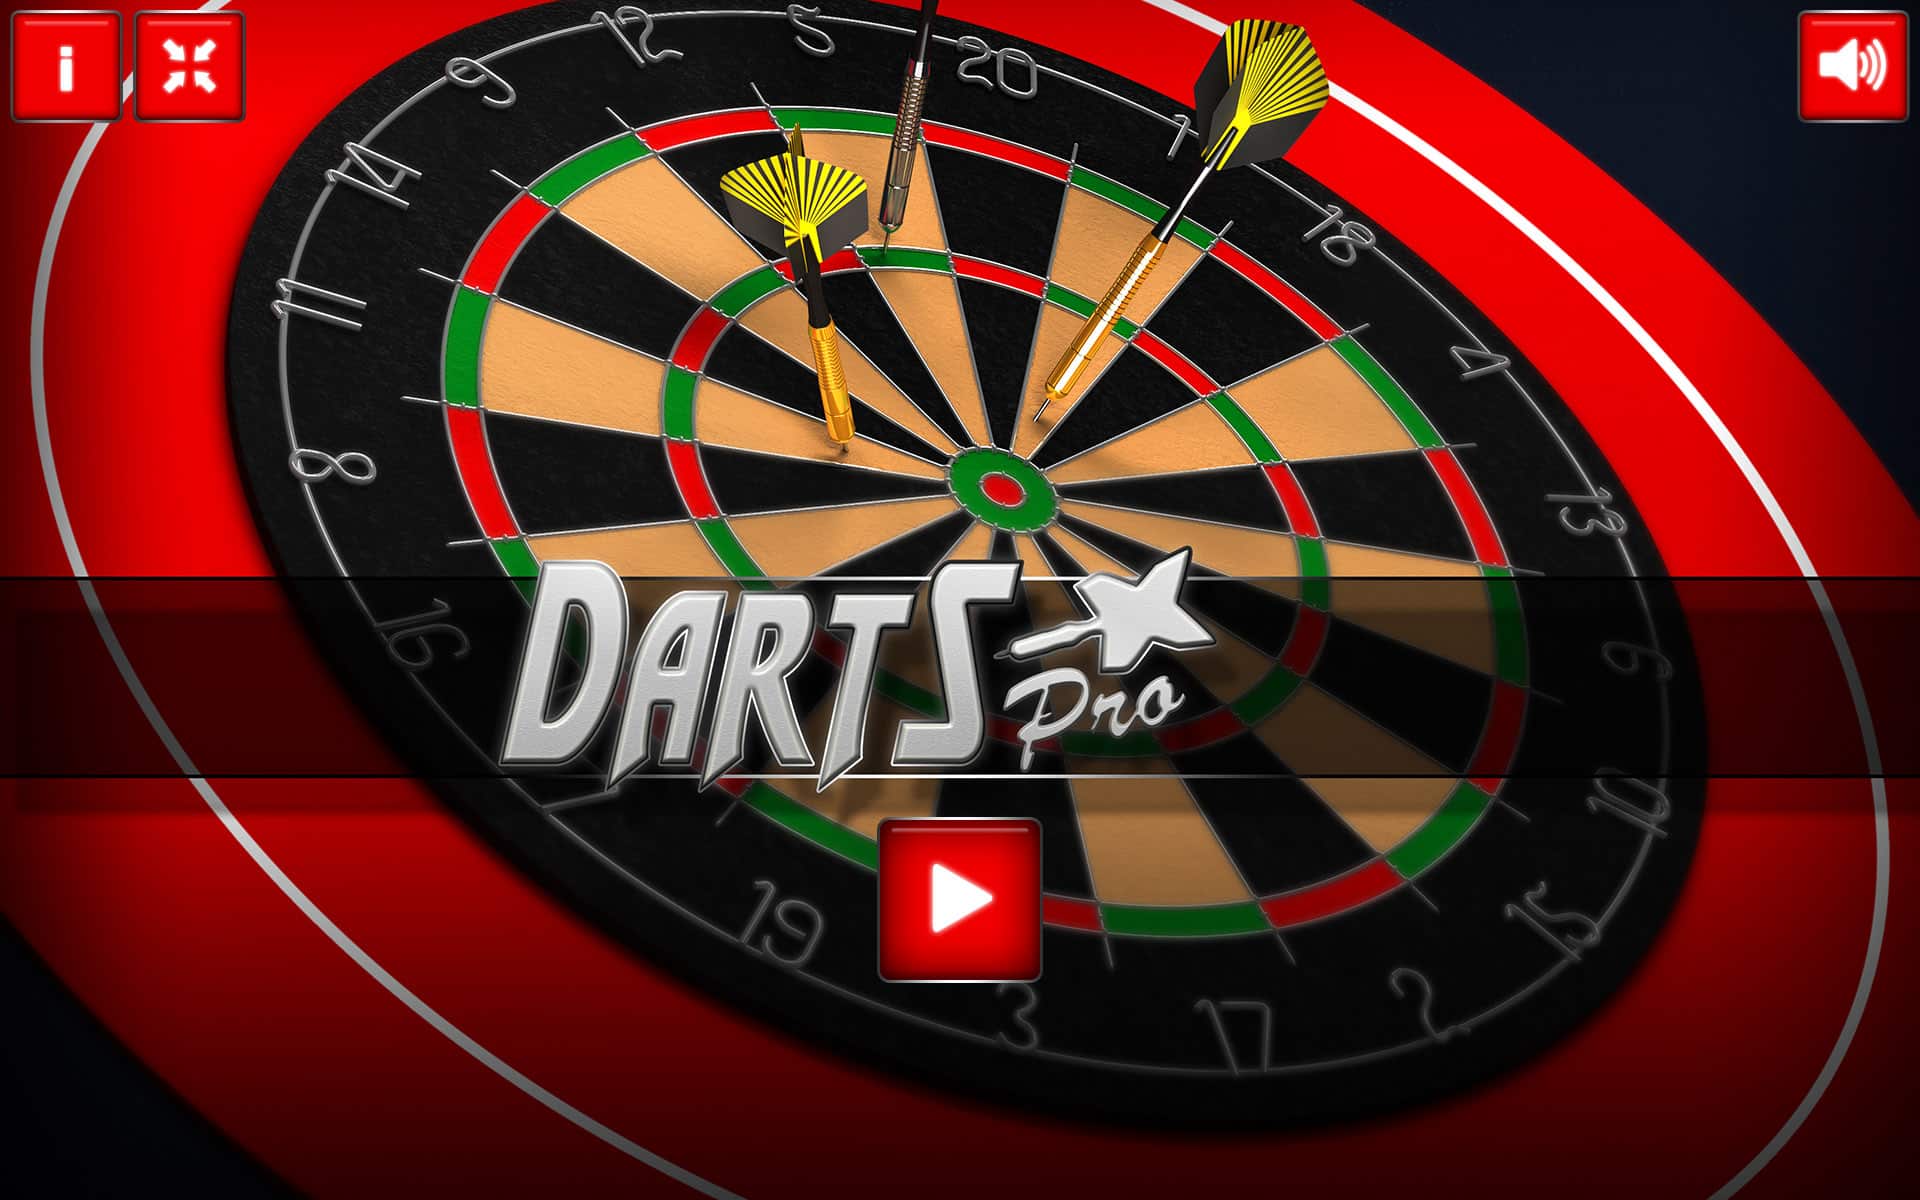 play-darts-pro-improvememory-online-games-for-kids-and-adults